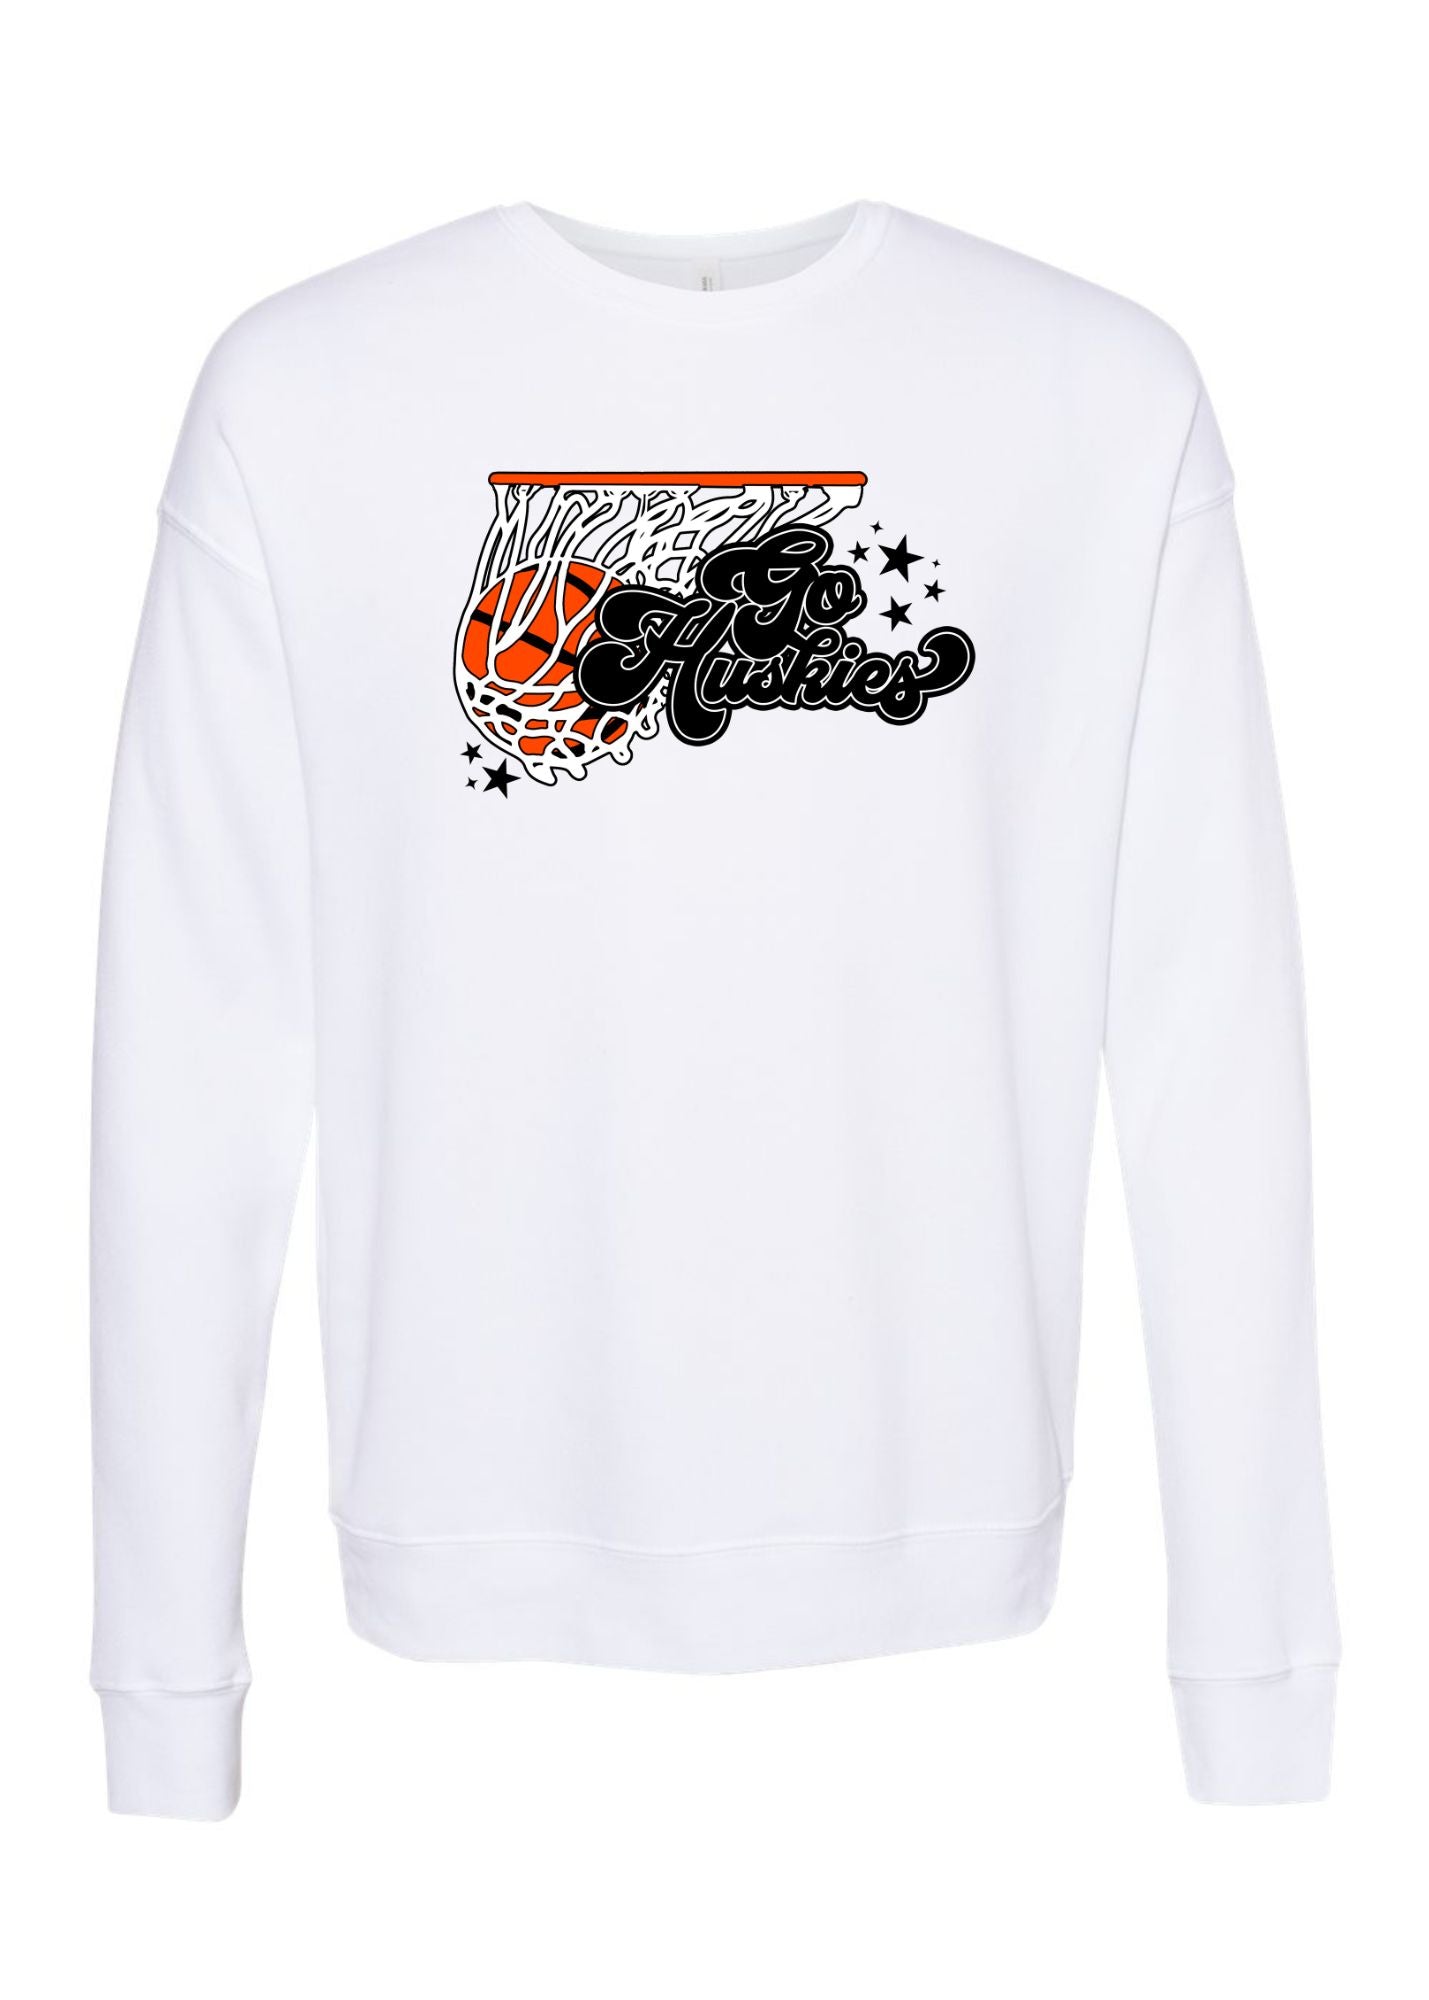 Go Huskies Basketball | Adult Pullover-Adult Crewneck-Sister Shirts-Sister Shirts, Cute & Custom Tees for Mama & Littles in Trussville, Alabama.